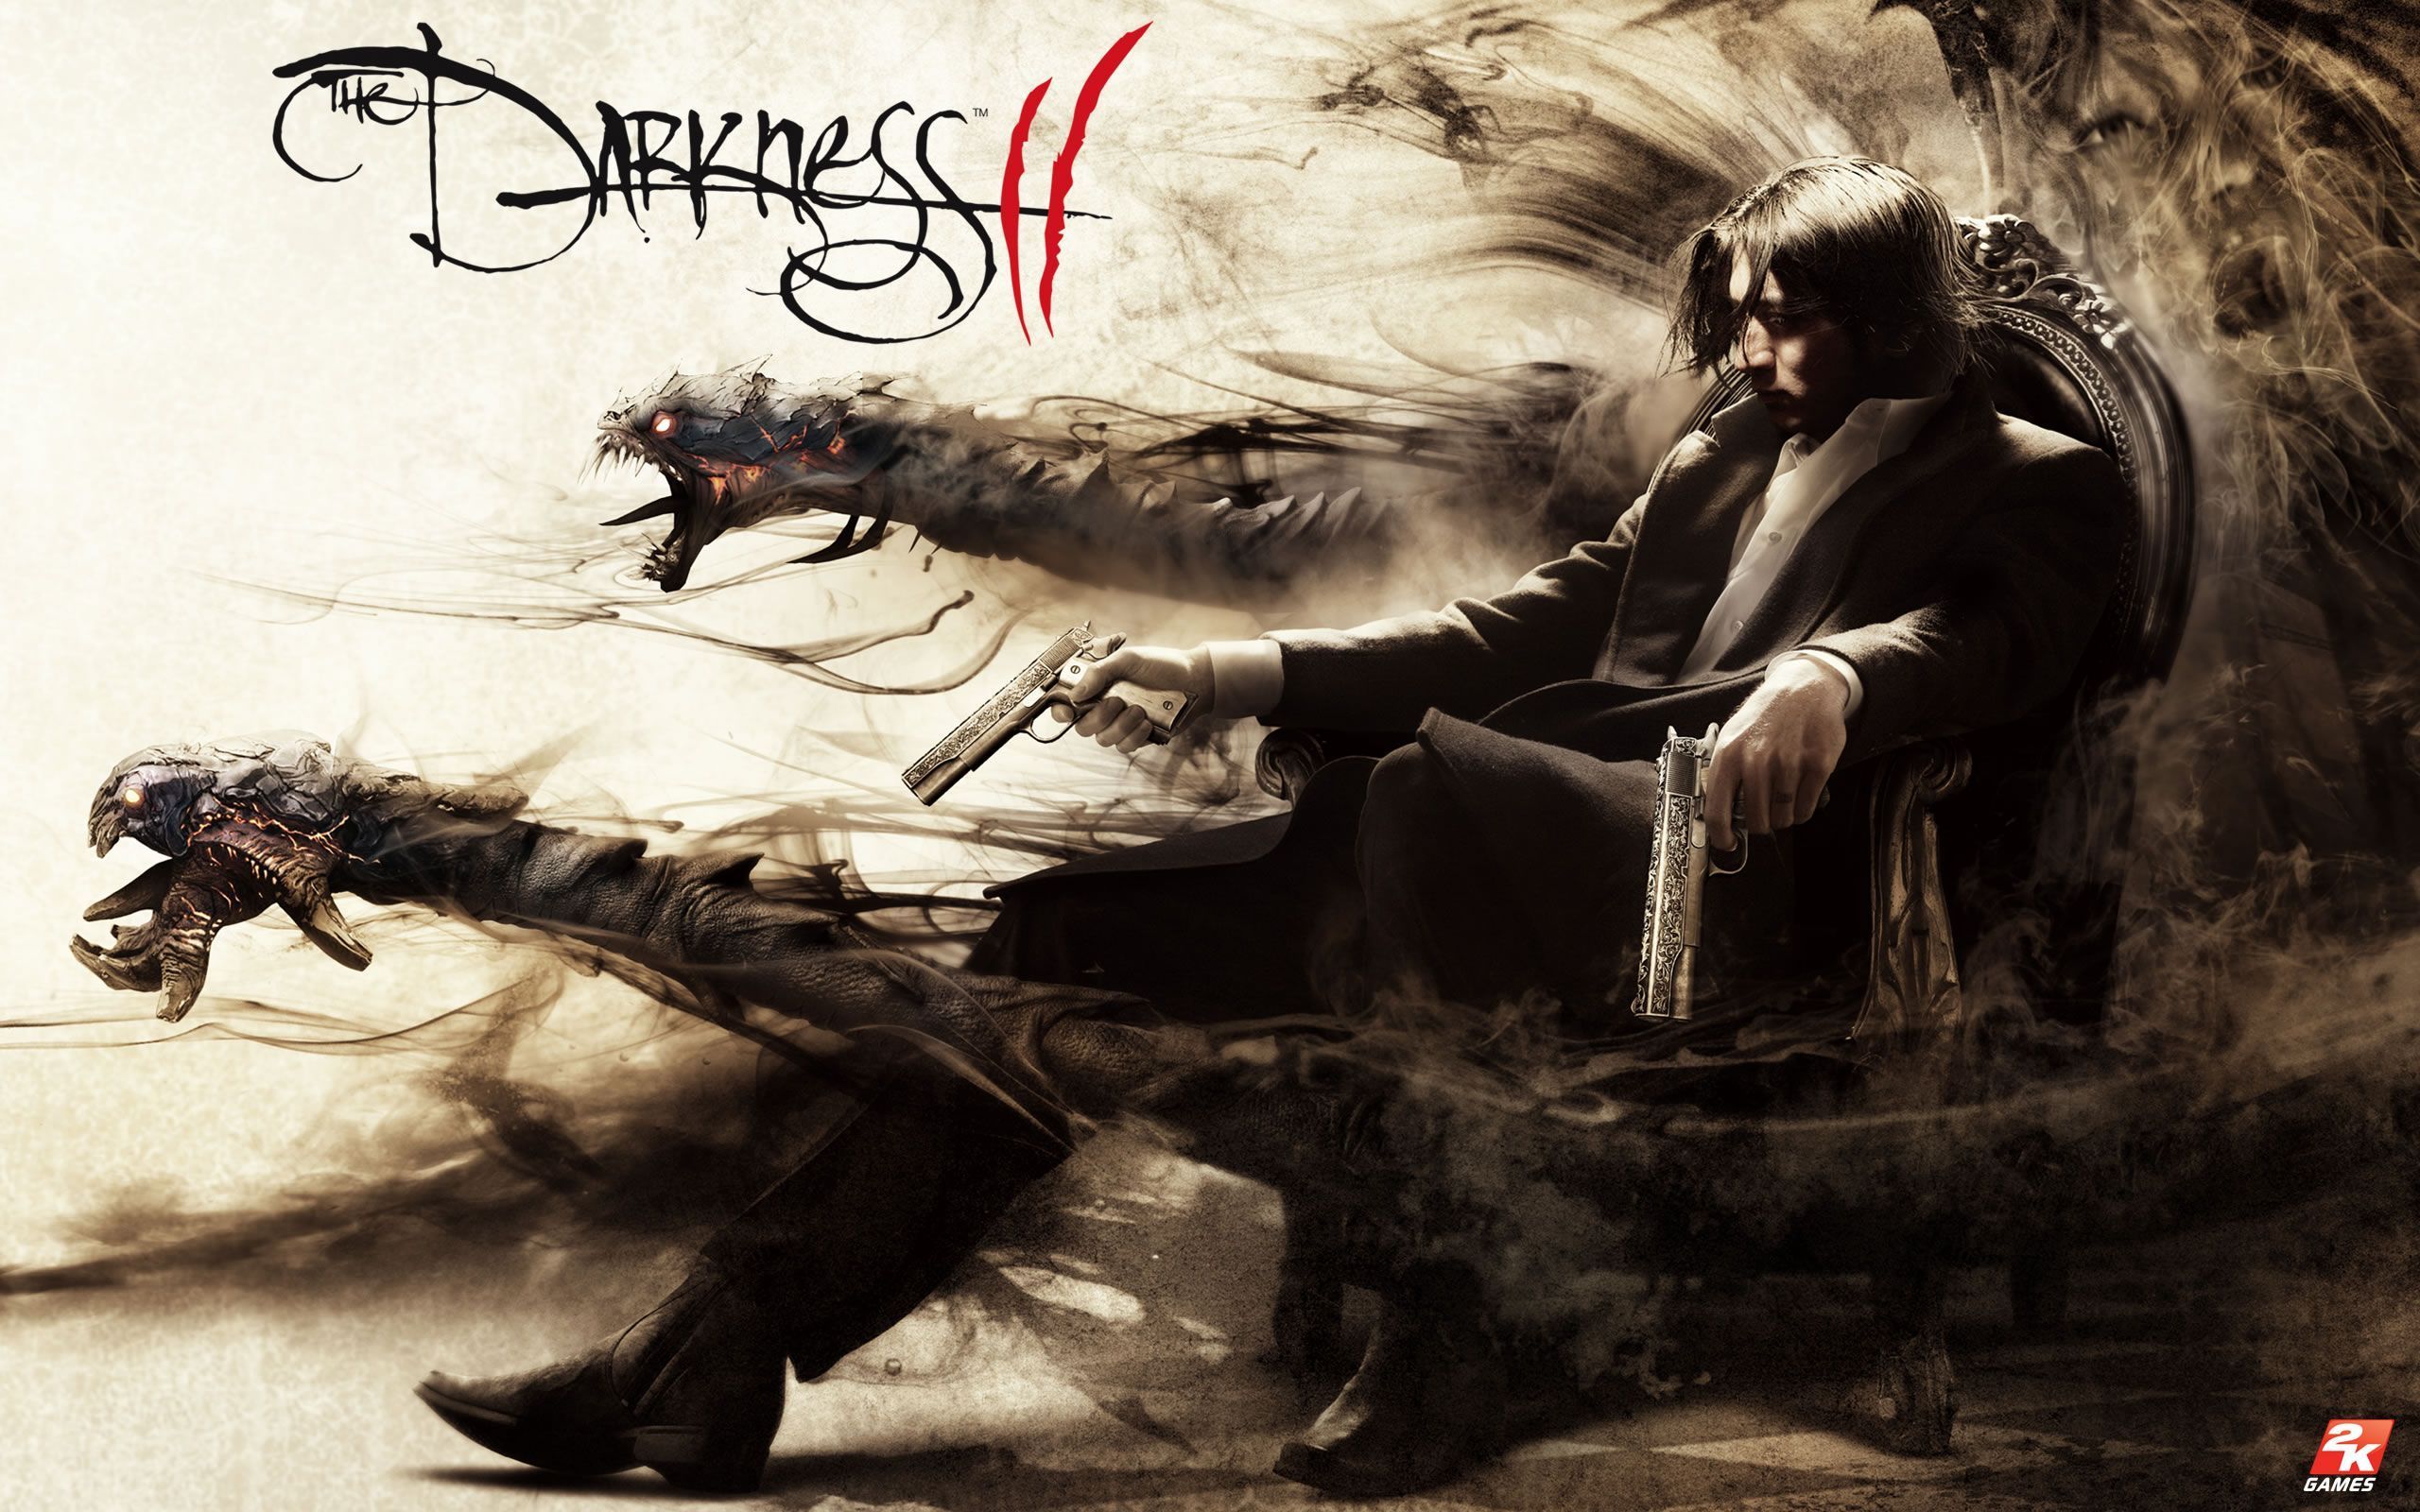 The Darkness II Wallpapers | HD Wallpapers